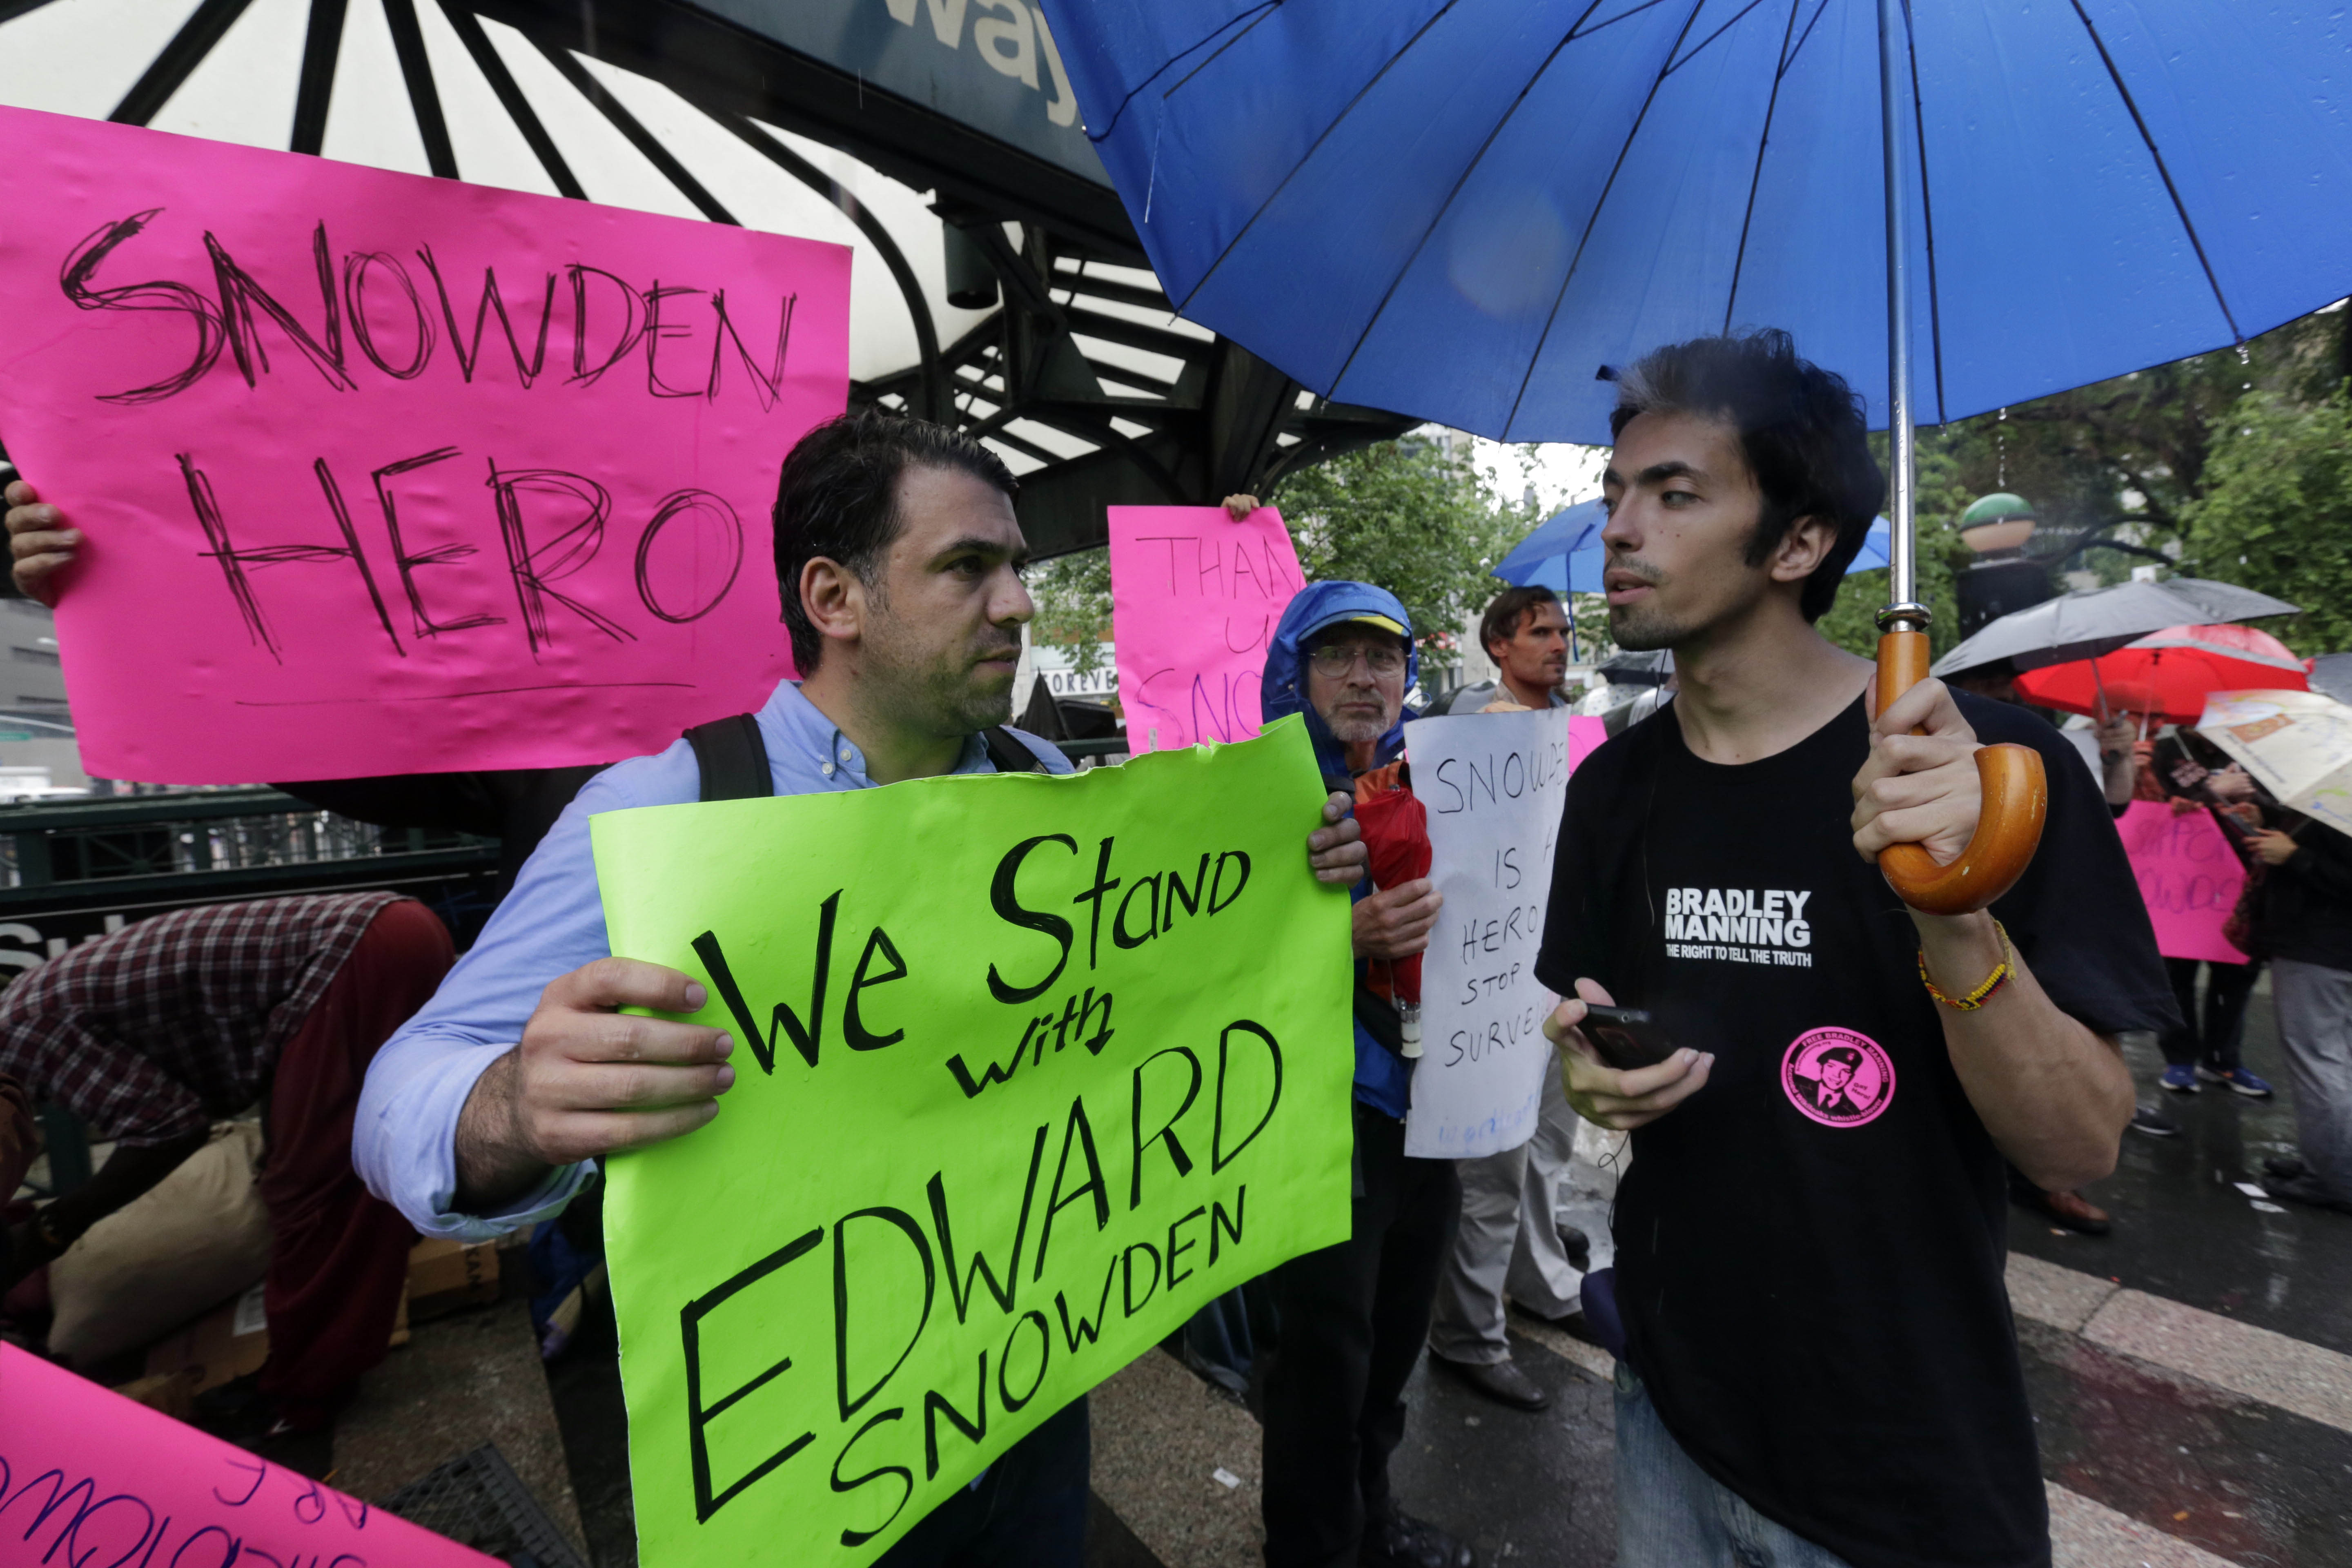 Supporters of Edward Snowden rally in New York on Monday. Photo: AP